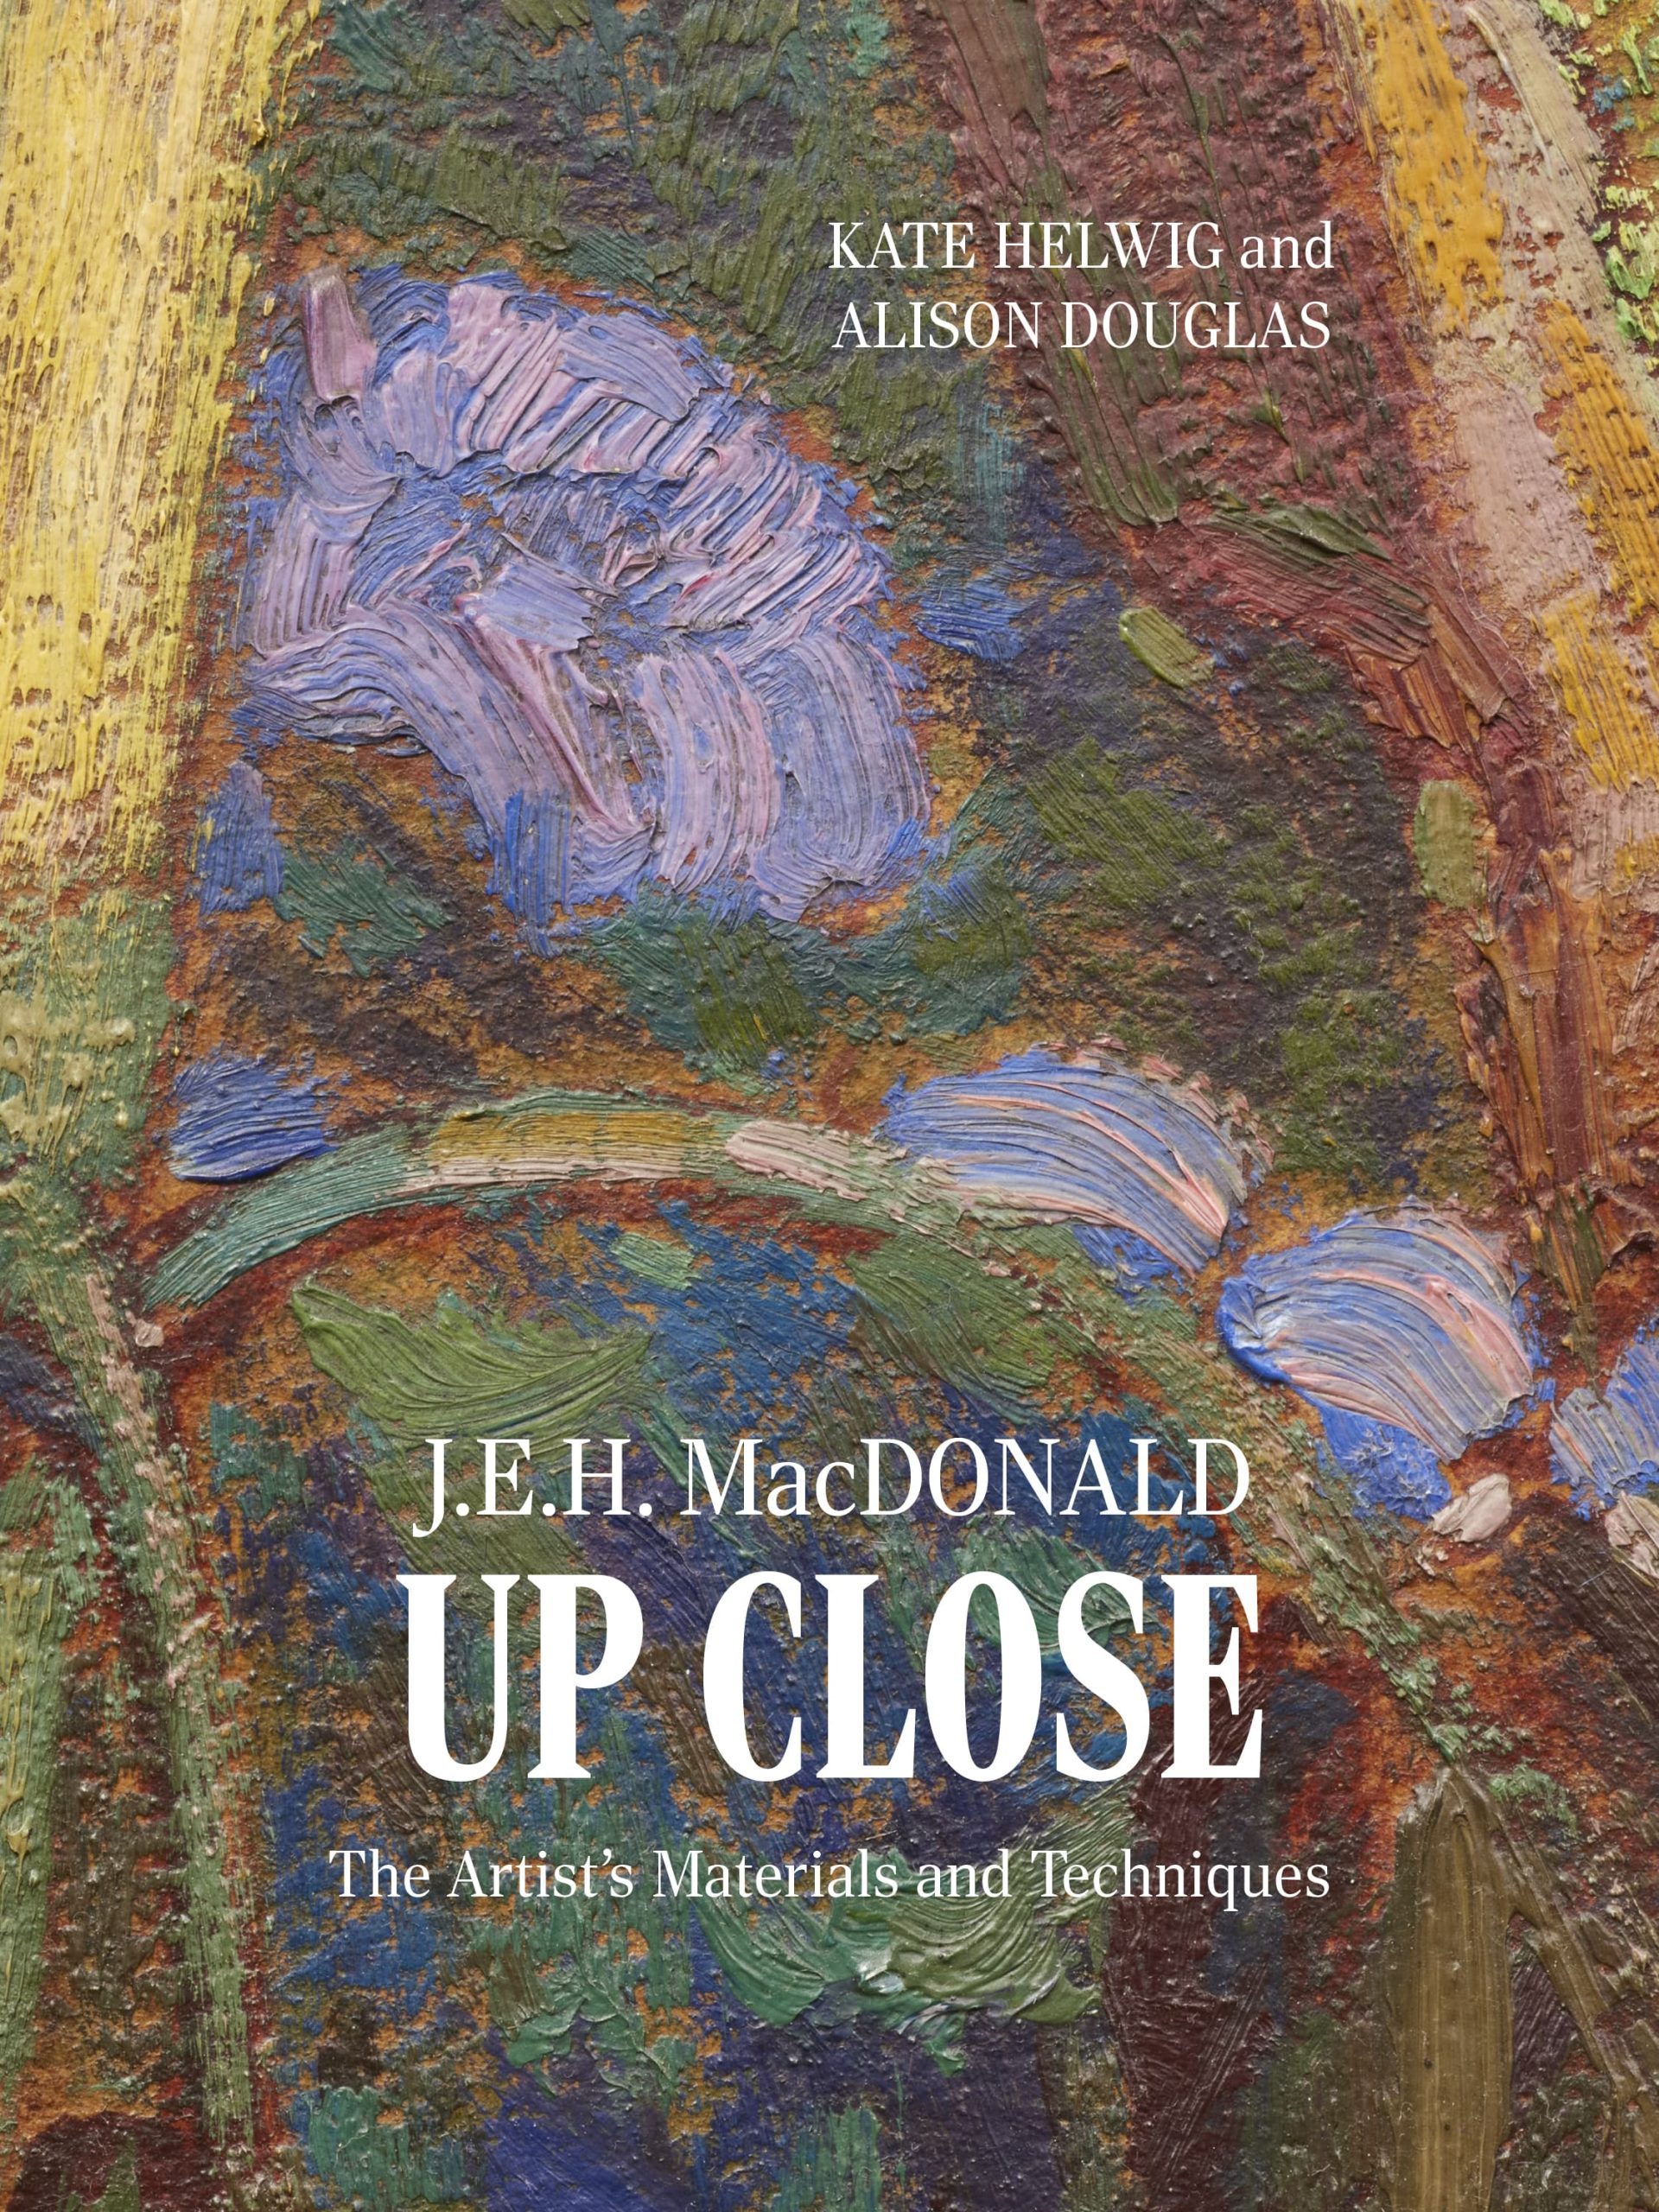 Book cover titled Up Close: The Artist's Materials and Techniques by J.E.H. MacDonald